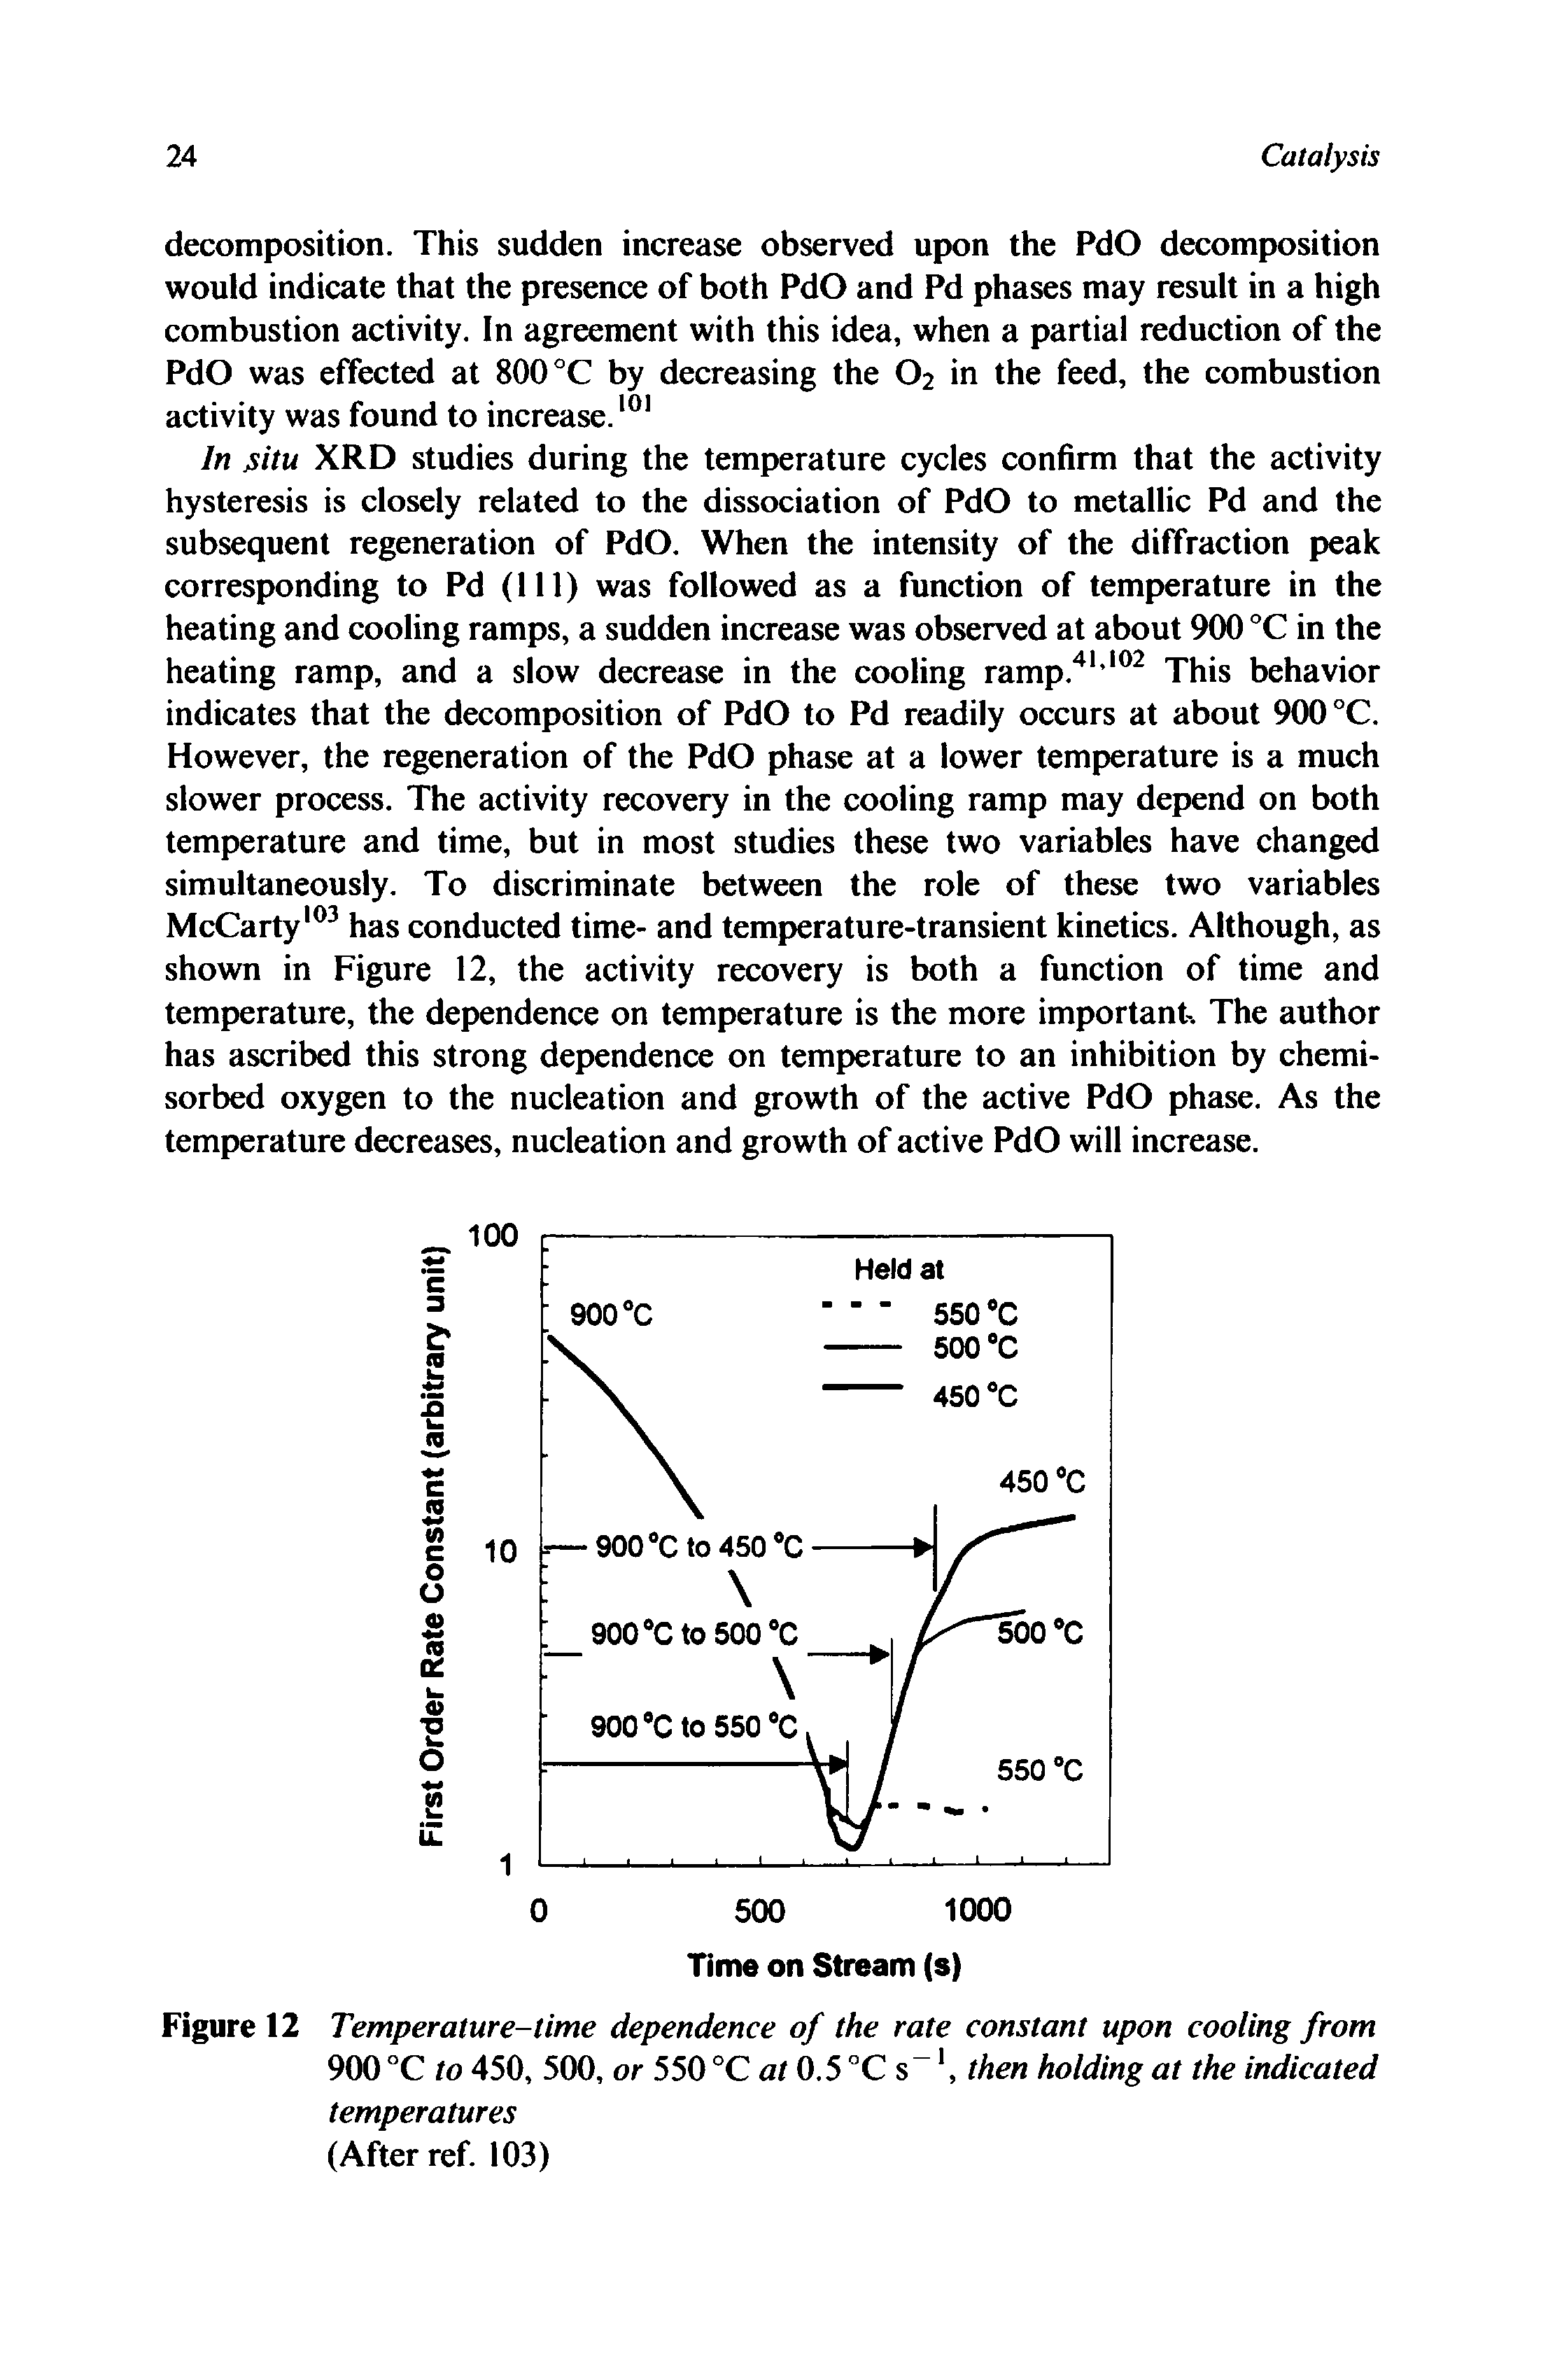 Figure 12 Temperature-time dependence of the rate constant upon cooling from 900 °C to 450, 500, or 550 °C at 0.5°Cs then holding at the indicated temperatures (After ref. 103)...